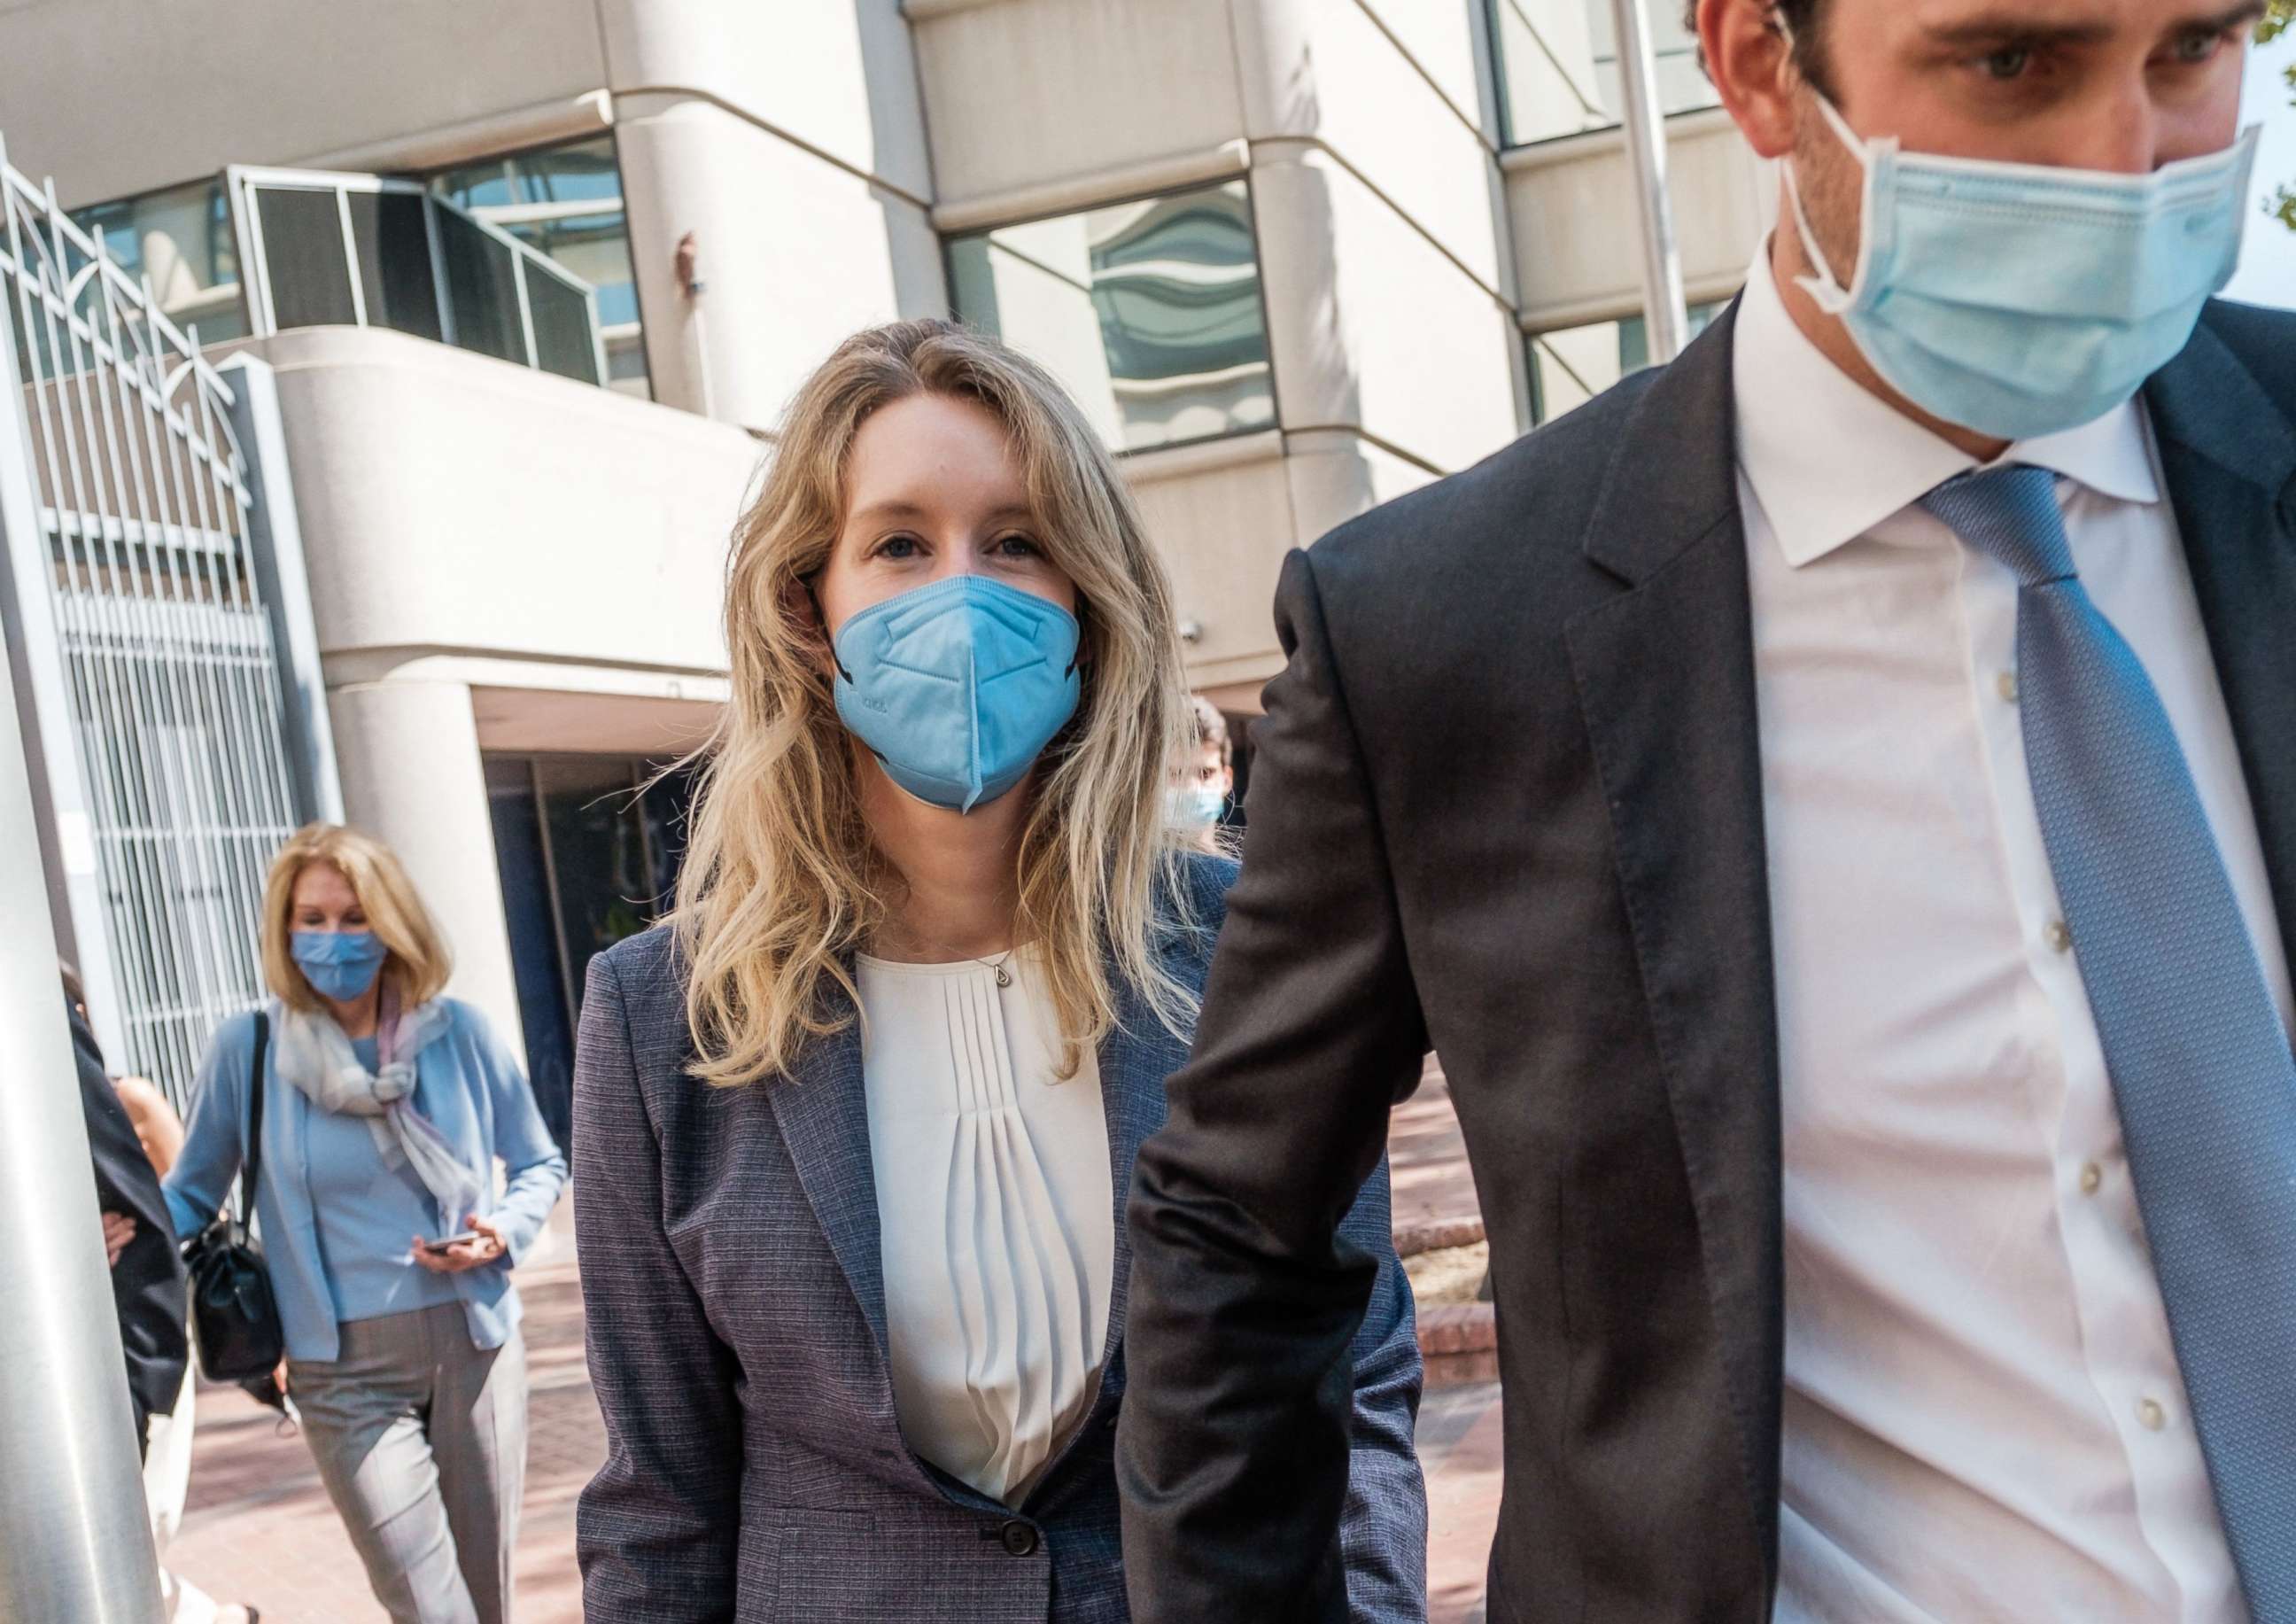 PHOTO: Elizabeth Holmes, founder and former CEO of Theranos, leaves the courthouse with her husband, Billy Evans after the first day of her fraud trial in San Jose, Calif., Sept. 8, 2021.